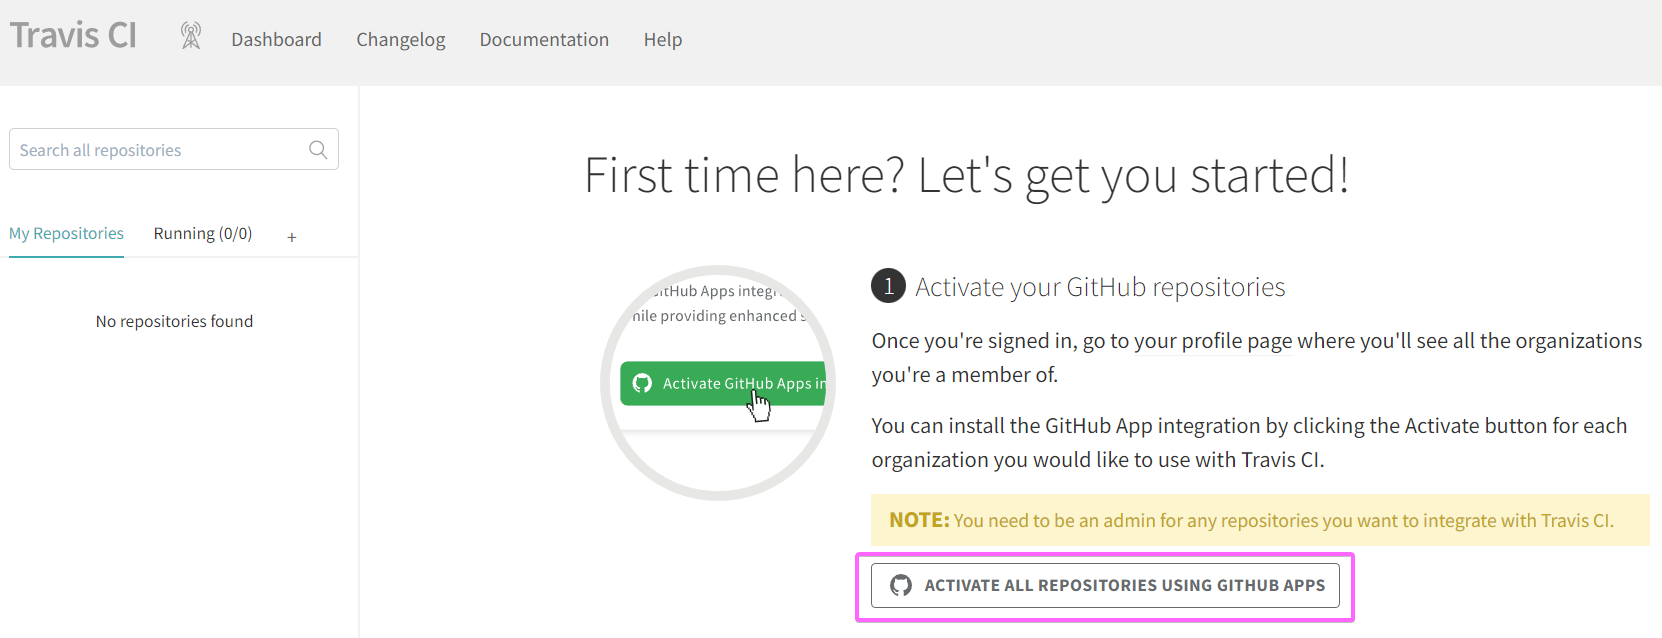 Activating all repositories using (GitHub Apps)